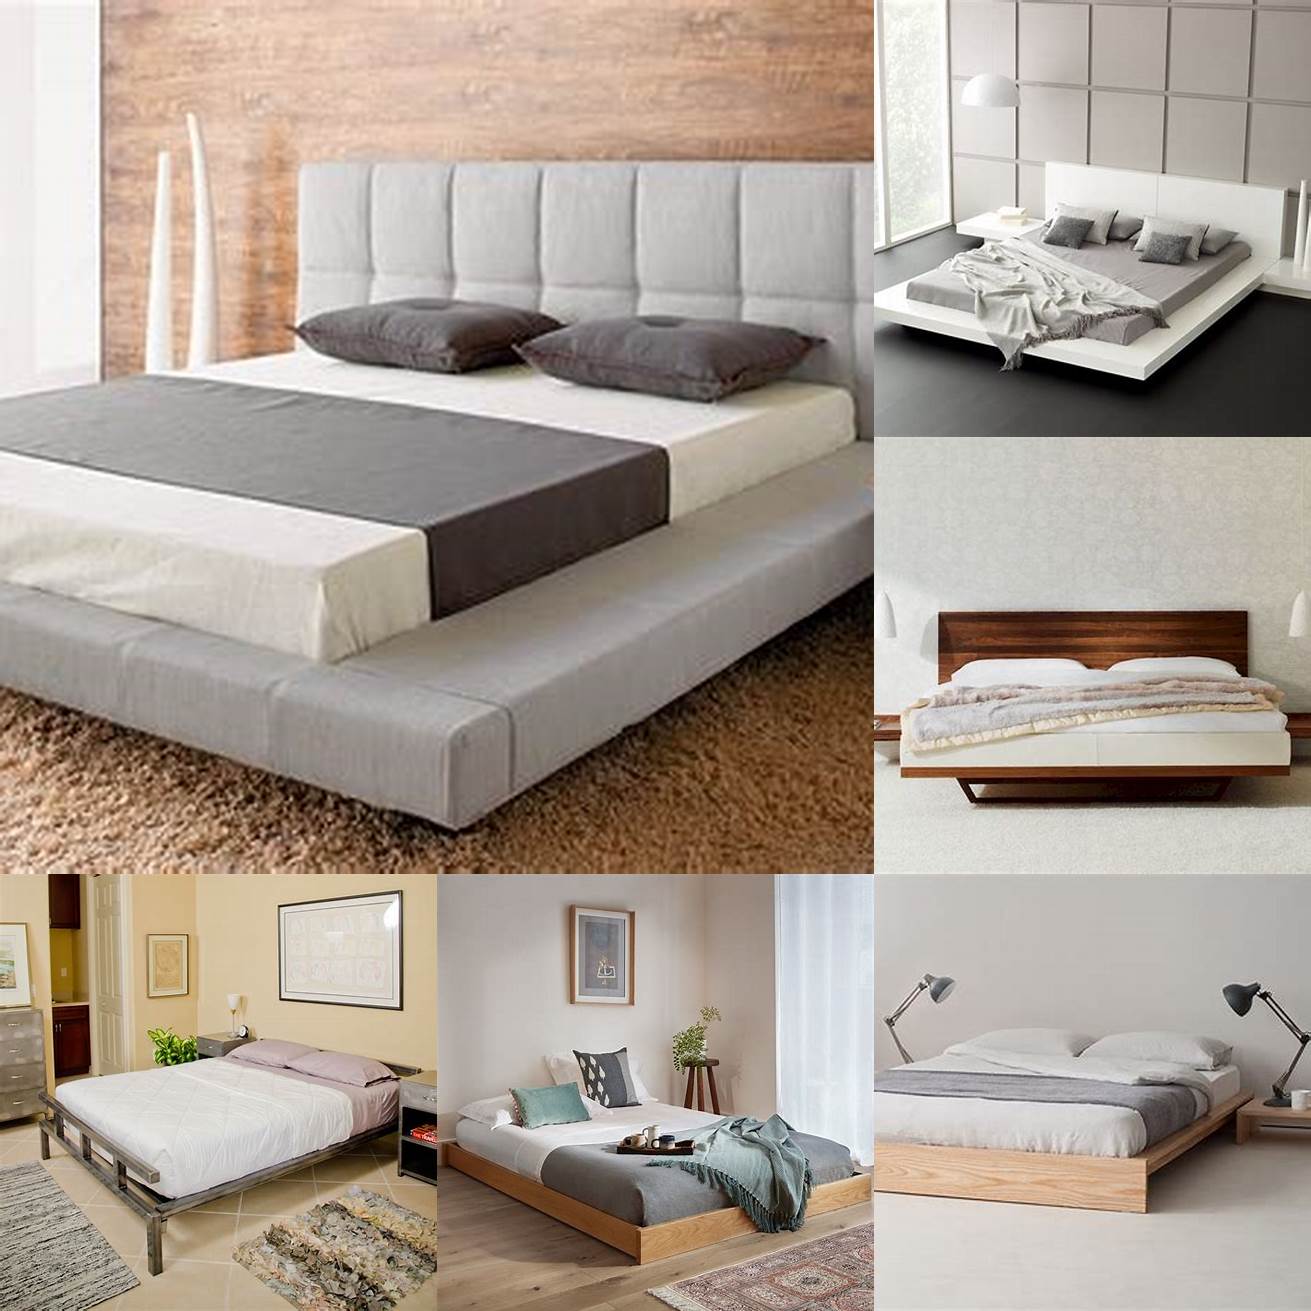 A minimalist platform bed with a low profile and clean lines